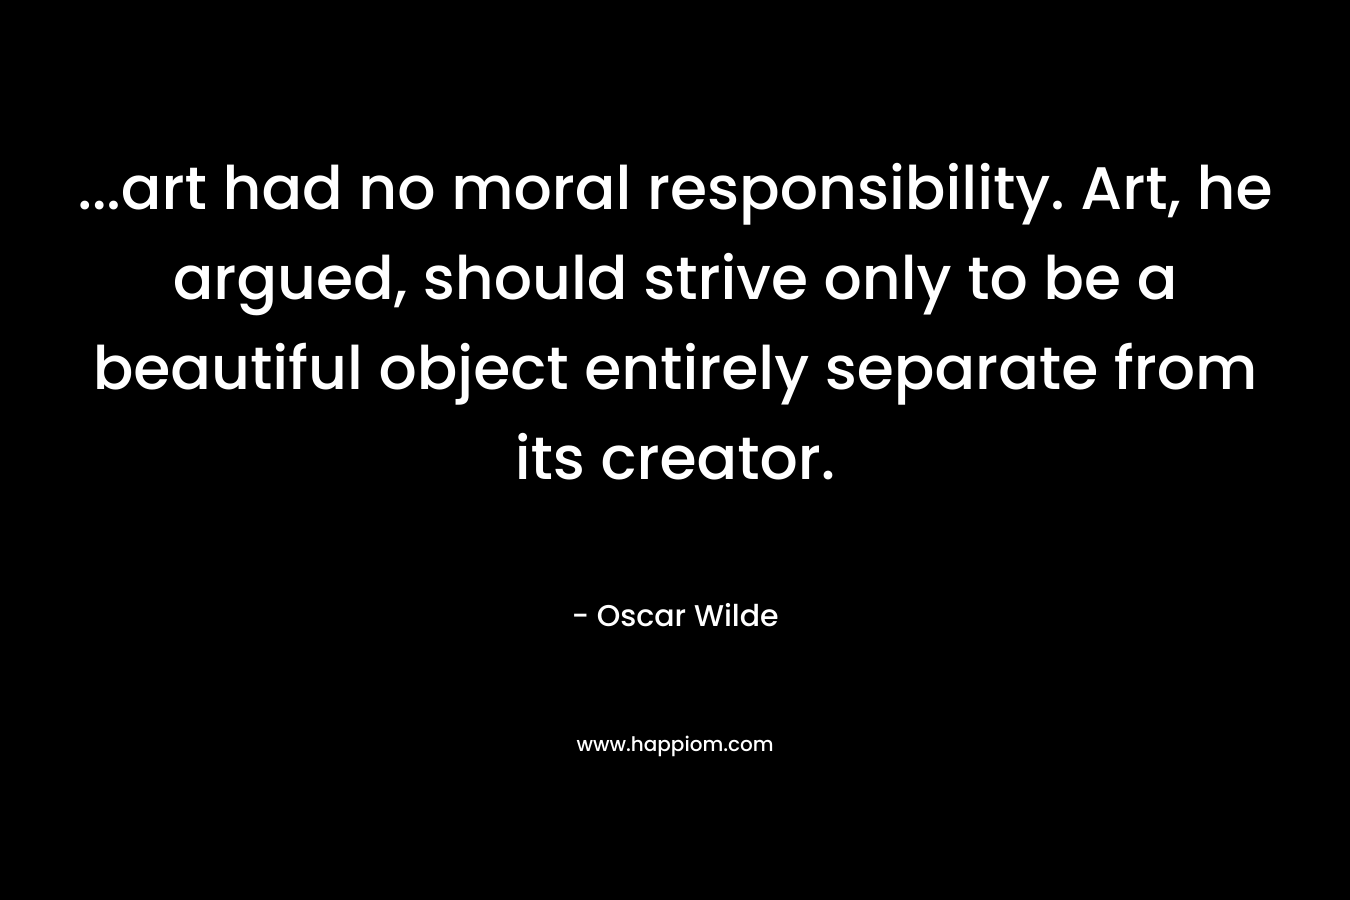 ...art had no moral responsibility. Art, he argued, should strive only to be a beautiful object entirely separate from its creator.